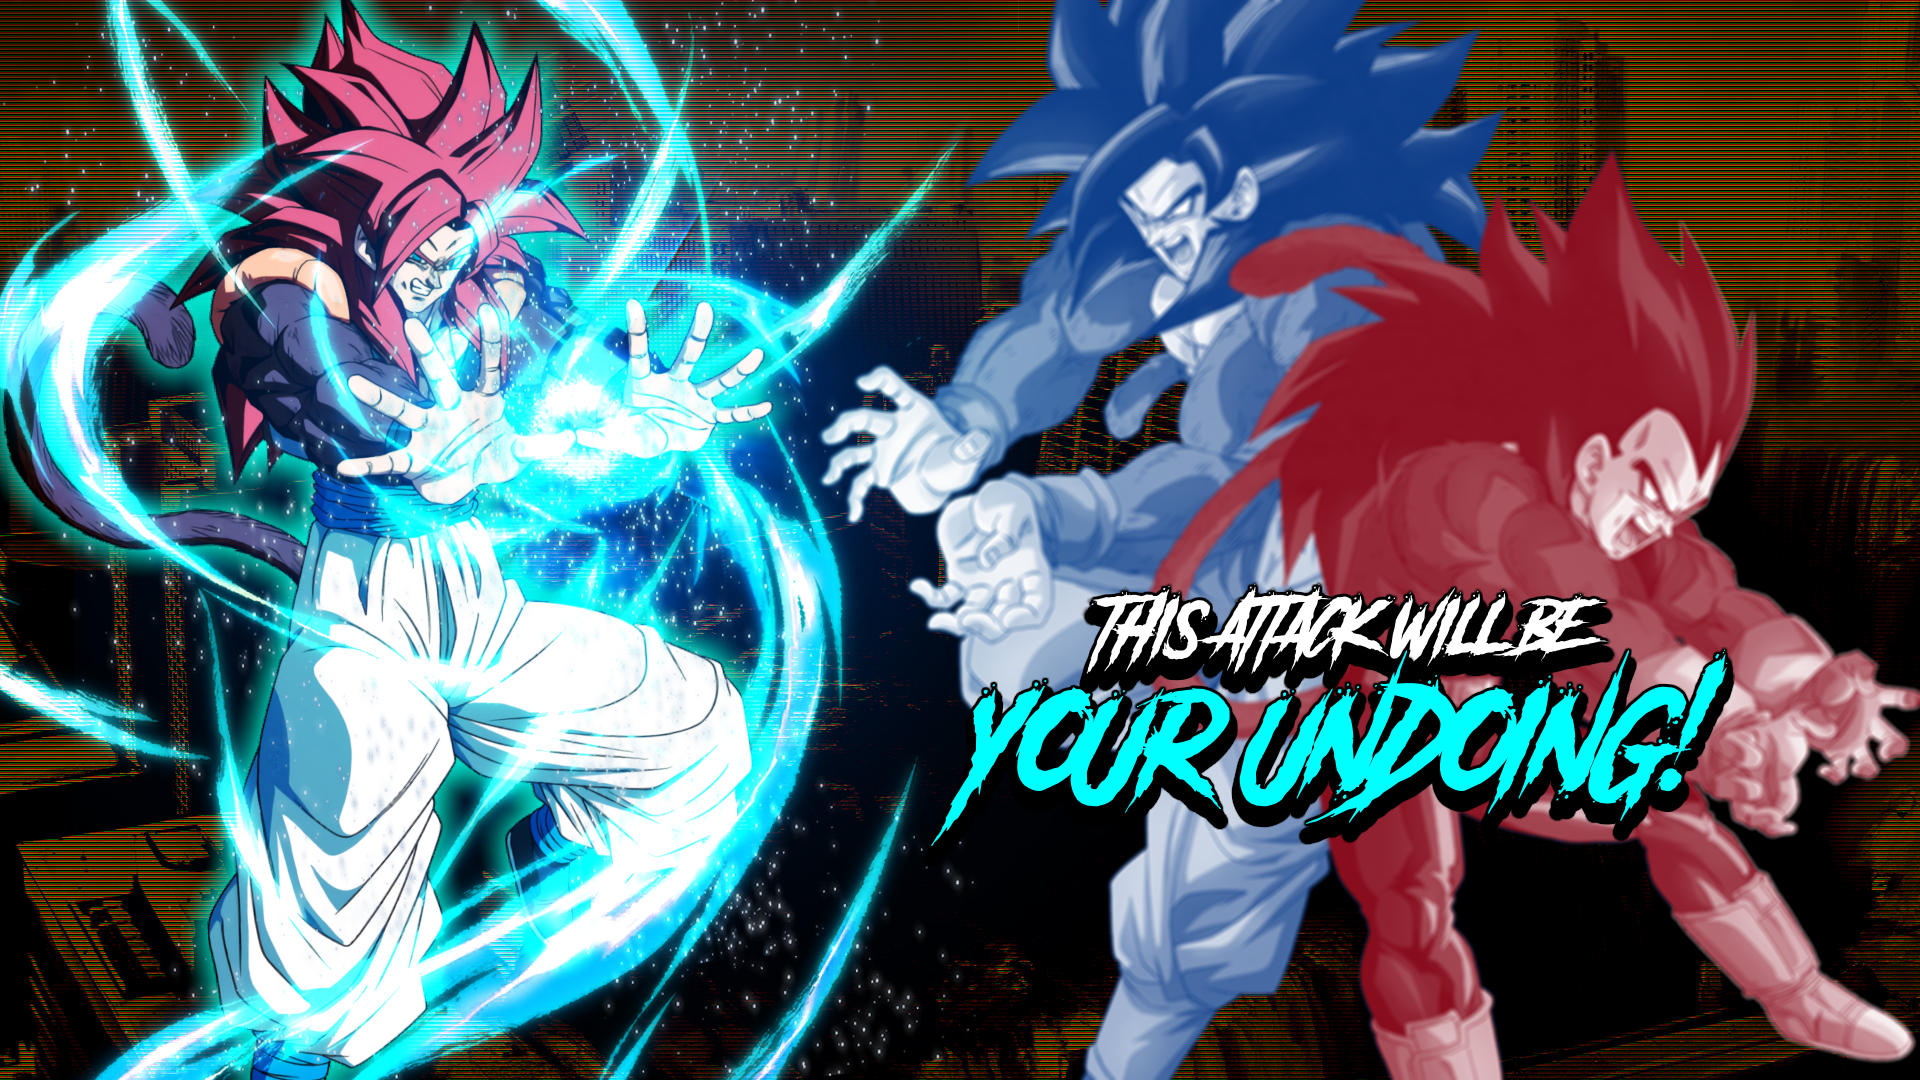 I got a lot of good feedback from my Broly wallpaper, so I decided to make a SSJ4 Gogeta wallpaper! Let me know what you think of this one